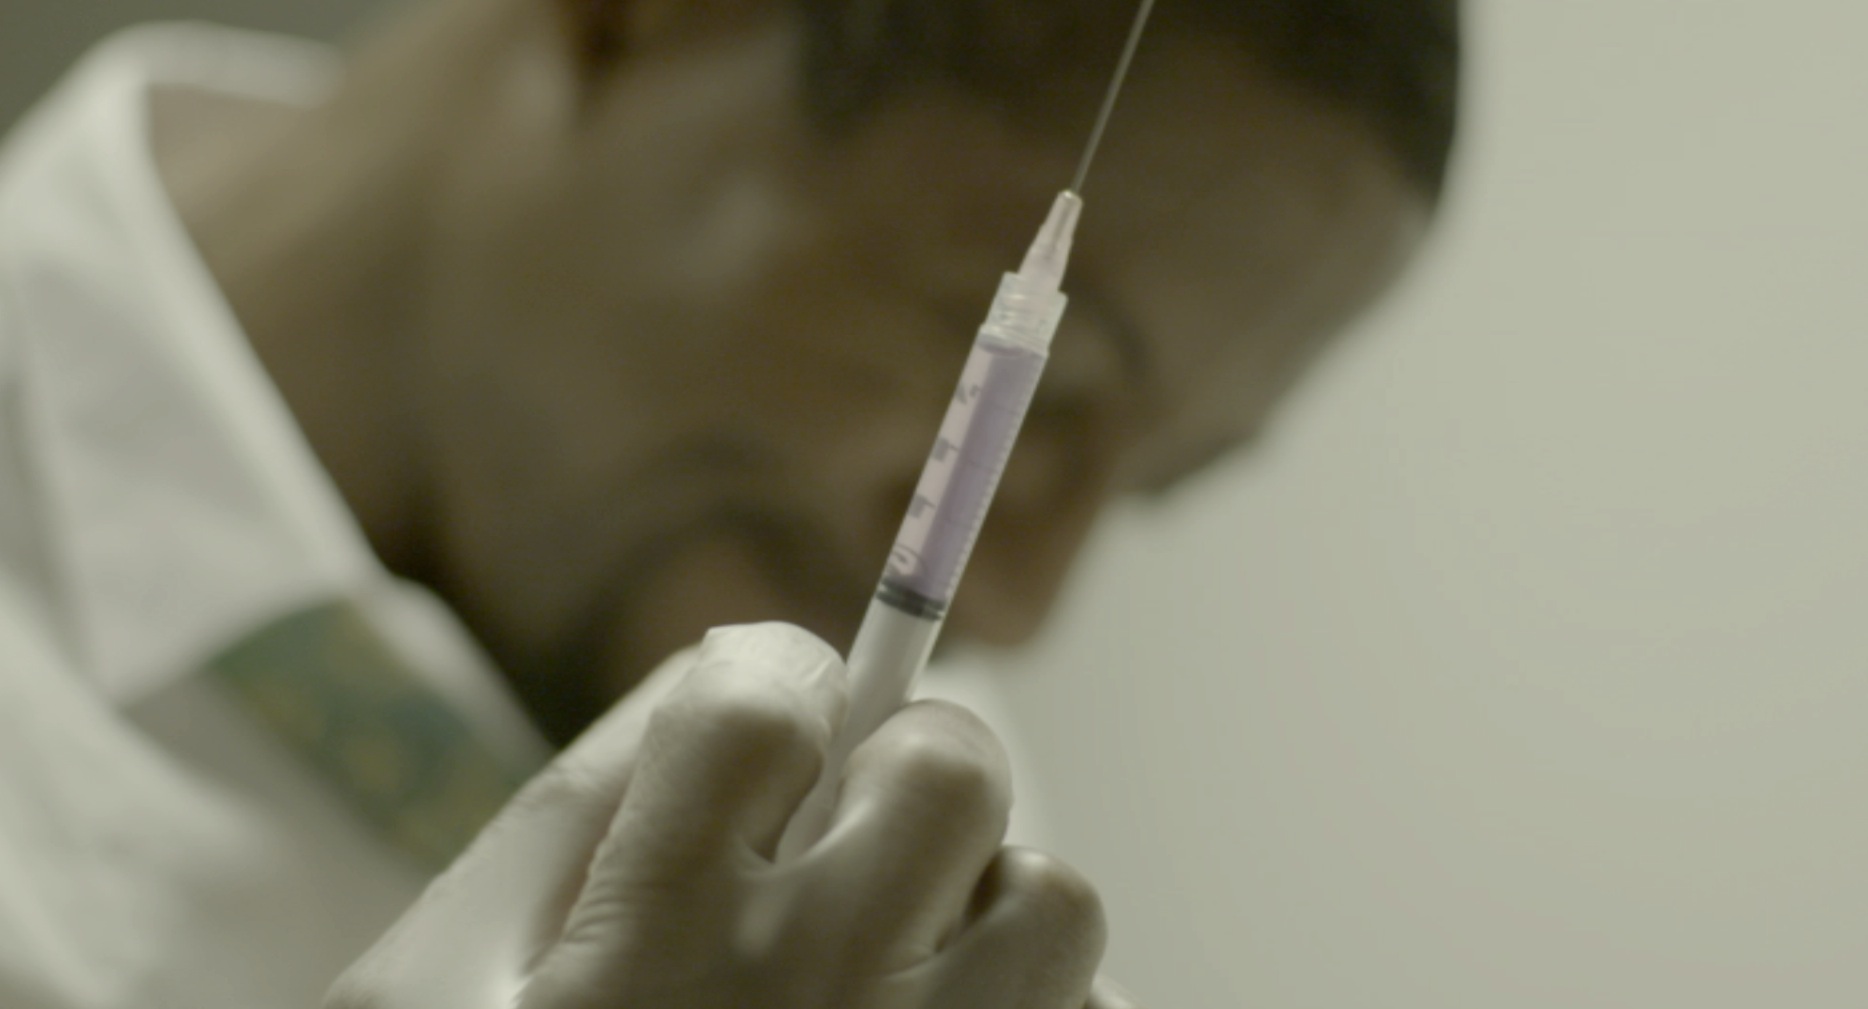  One of the great lessons from working on such a visual film was that there is a lot to be said by the things and not just the people. The shot of the syringe seemed like a simple insert, but it became much more in what it symbolized: The dad contemp